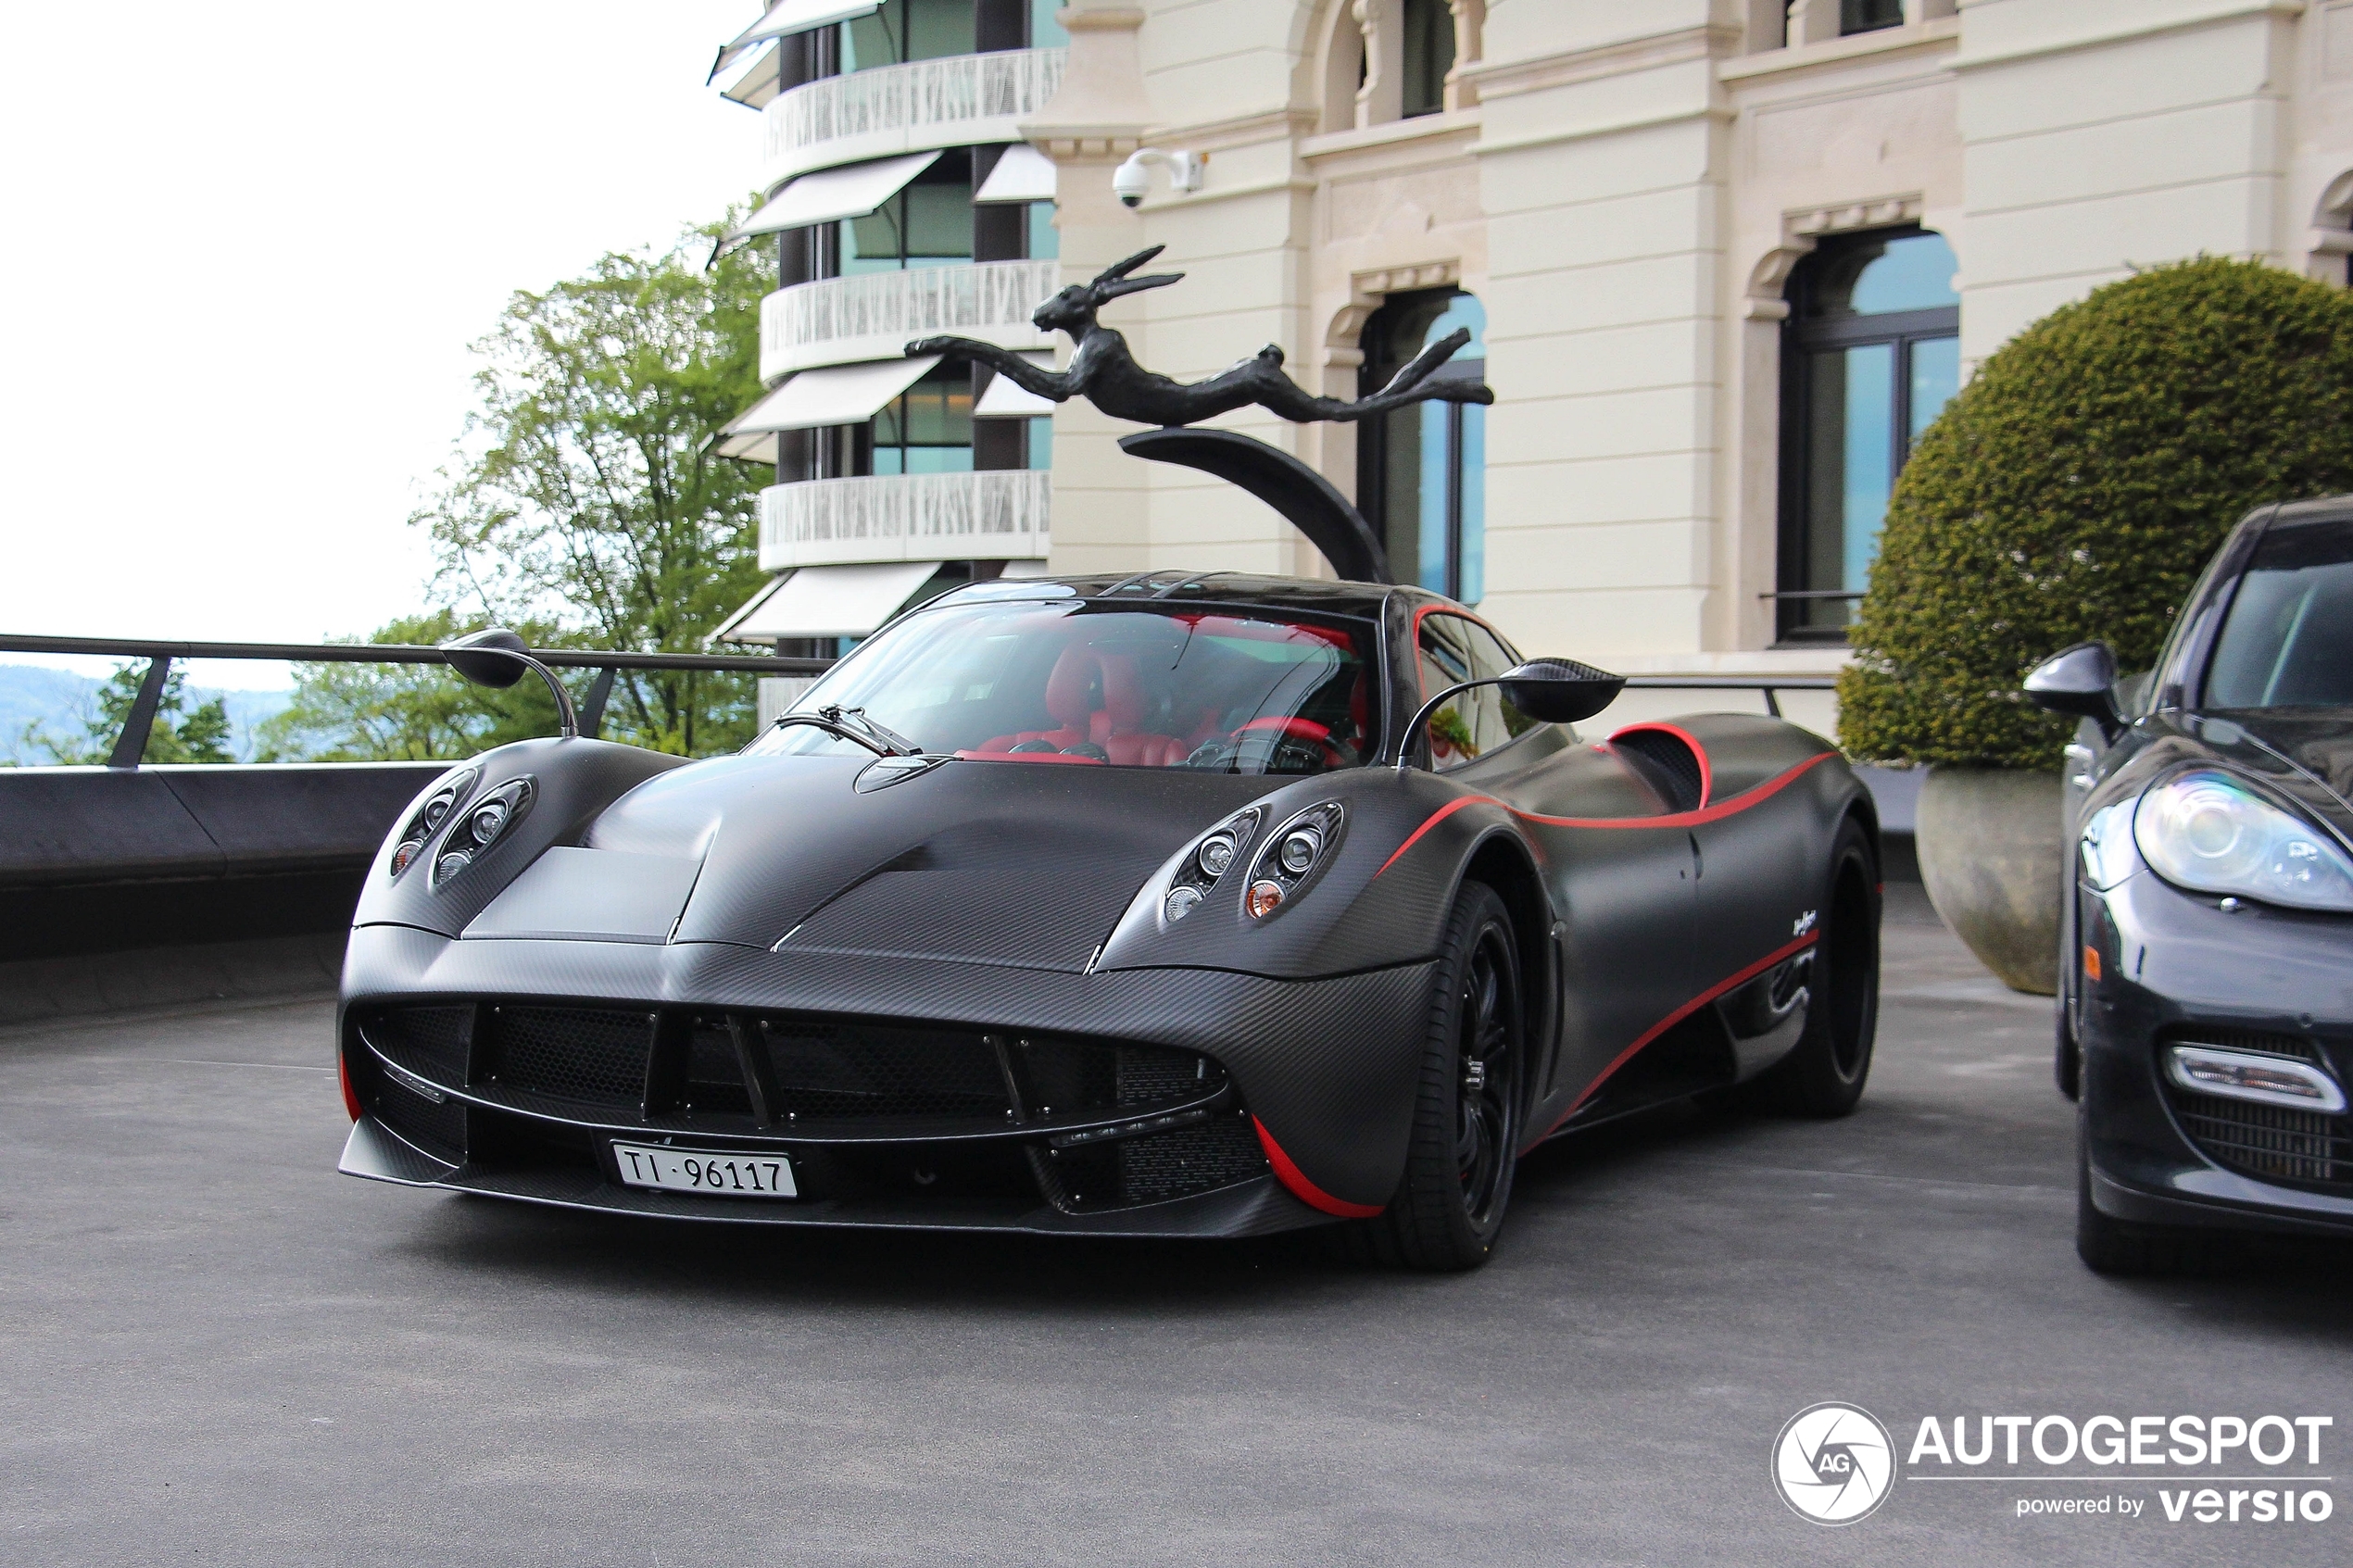 Pagani Huayra shows up in Zurich